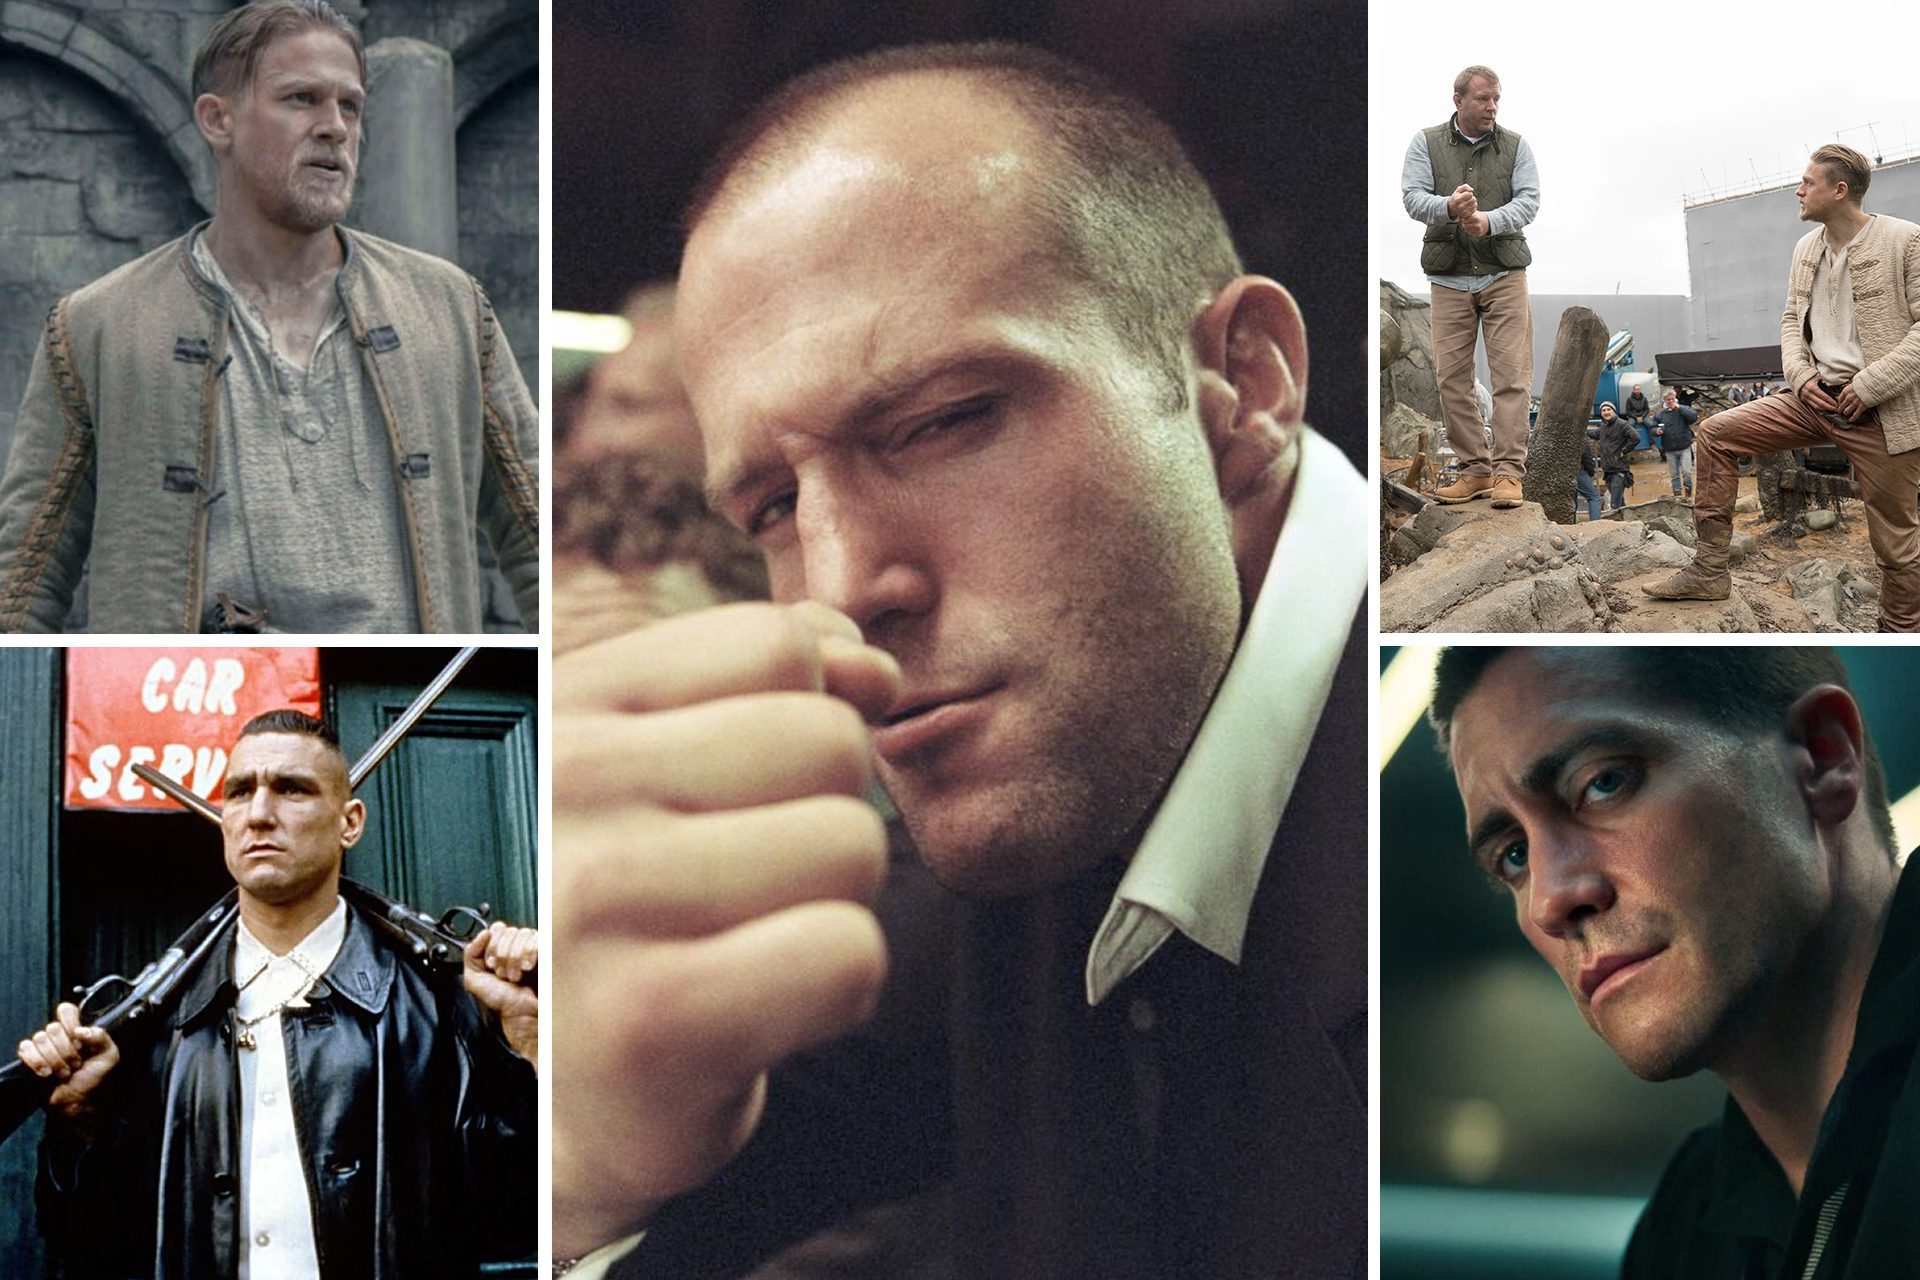 guy ritchie movies